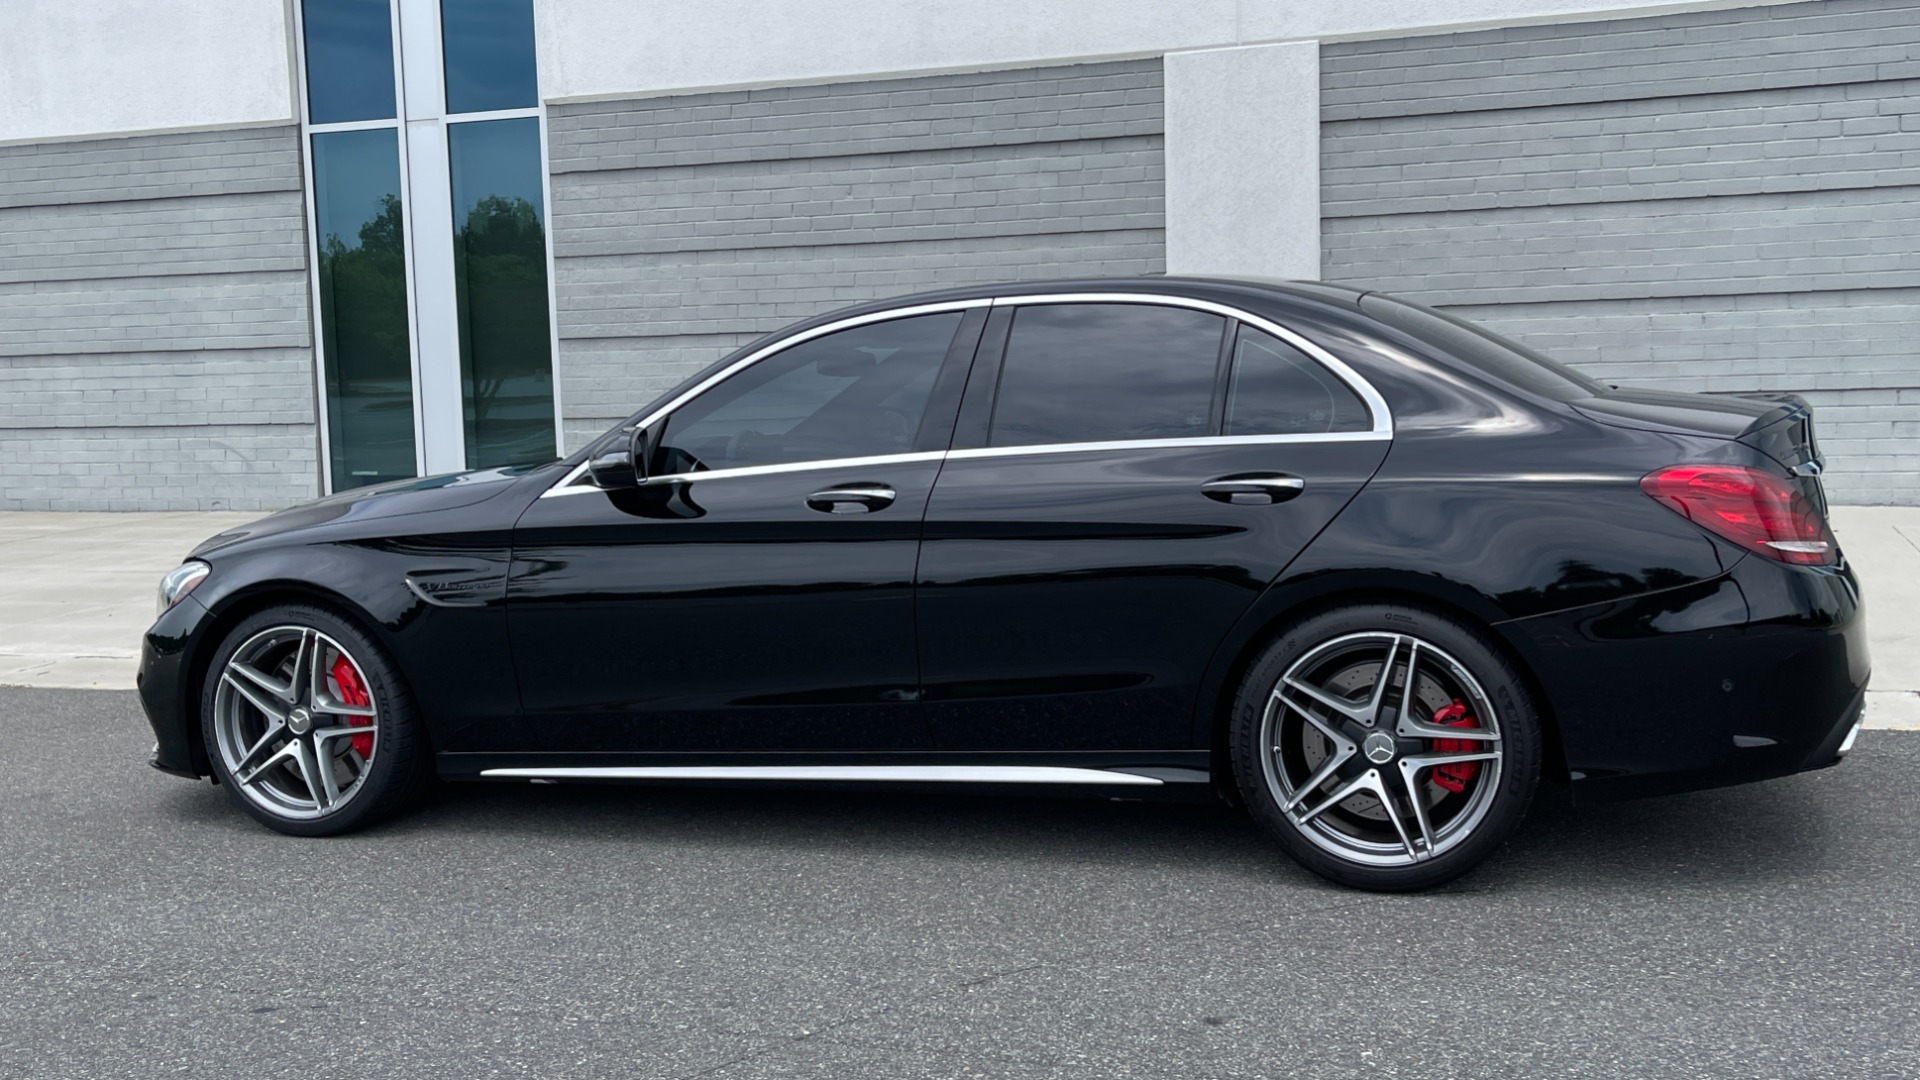 Used 2016 Mercedes-Benz C-CLASS AMG C 63 S SEDAN / NAV / BURMESTER / PANO-ROOF / CAMERA for sale $58,000 at Formula Imports in Charlotte NC 28227 3